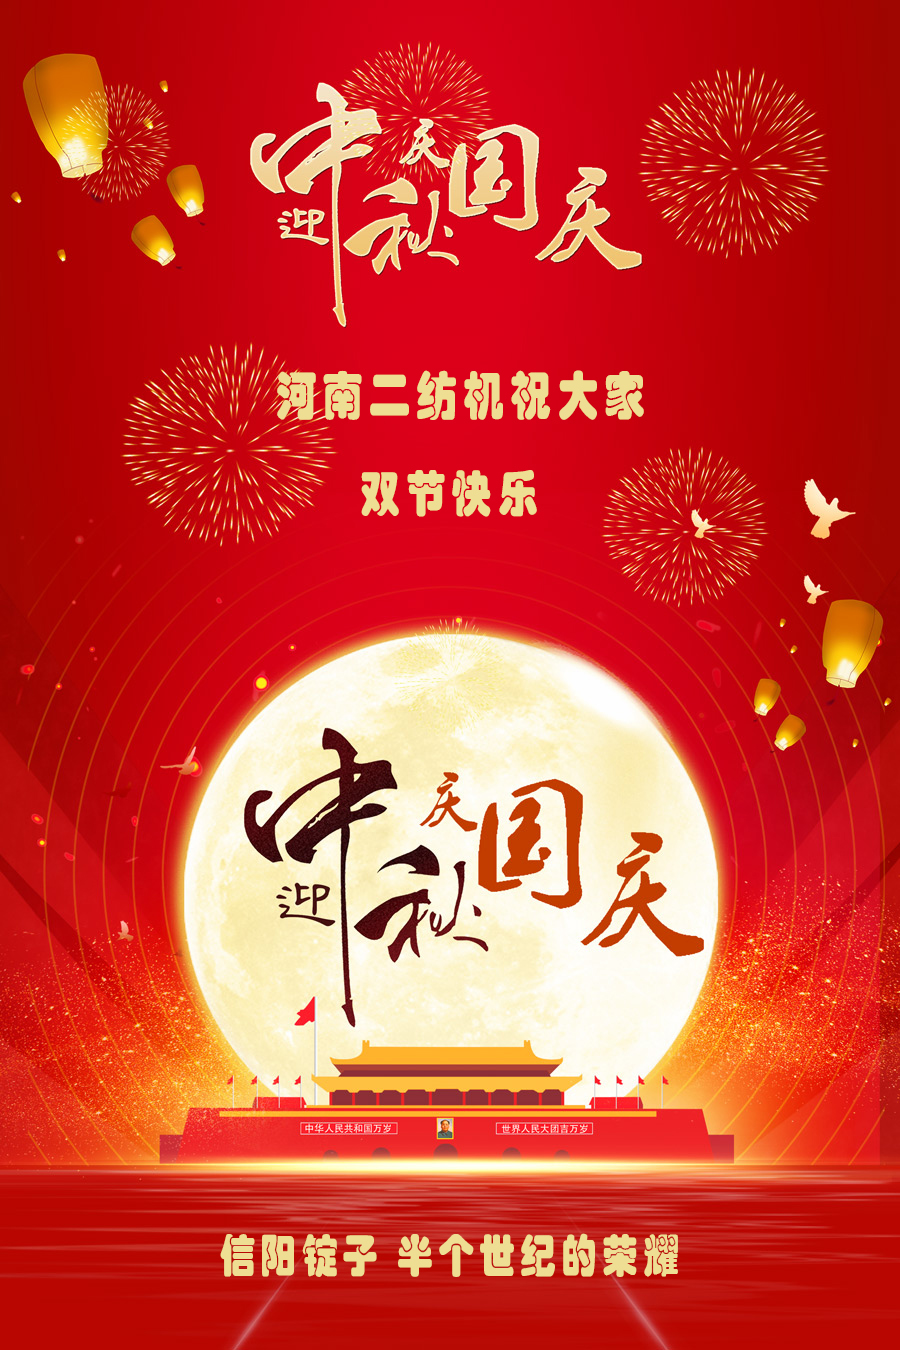 To celebrate the Mid-Autumn Festival and National Day, I wish you a happy double festival